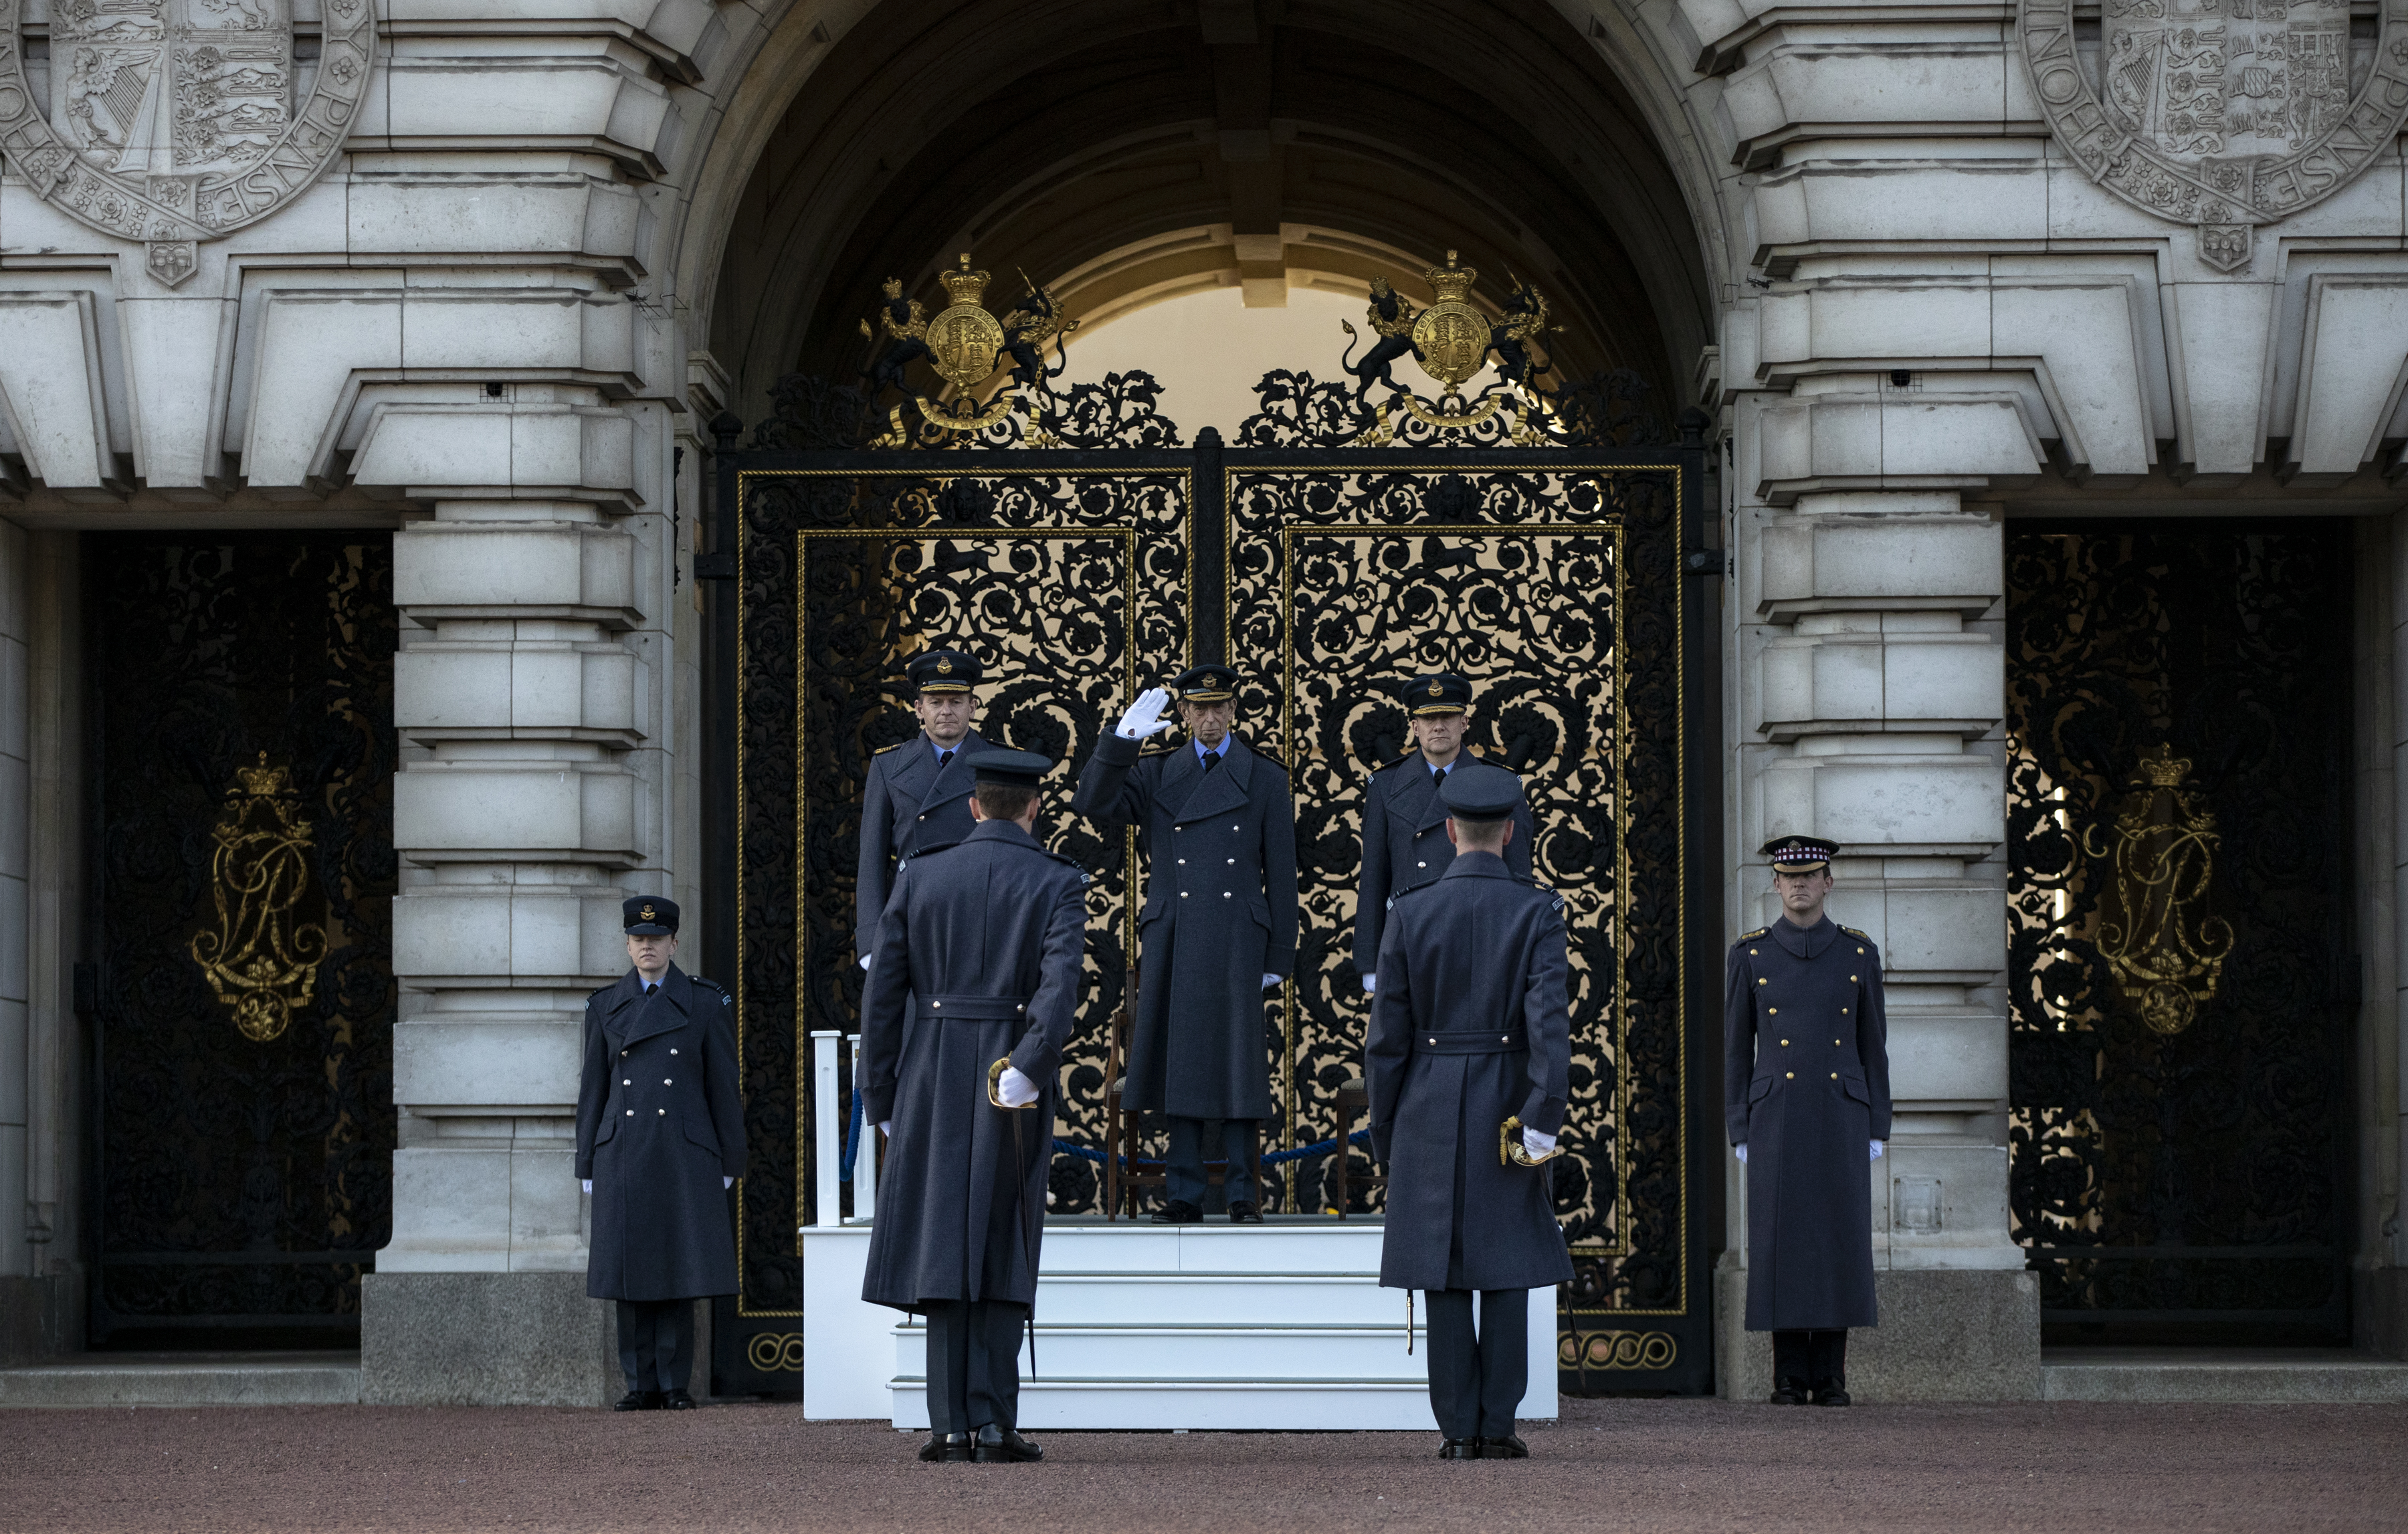 Personnel salute on parade outside Buckingham Palace.